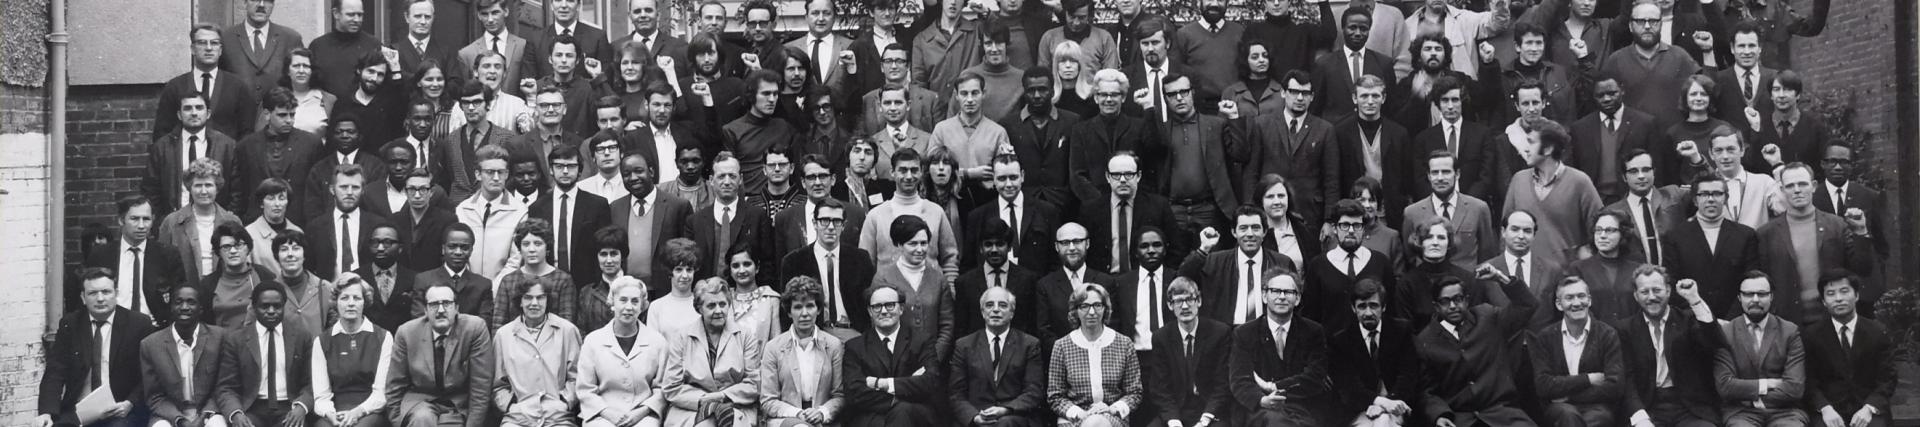 A black and white photo taken in the 1970s of around 100 alumni students.